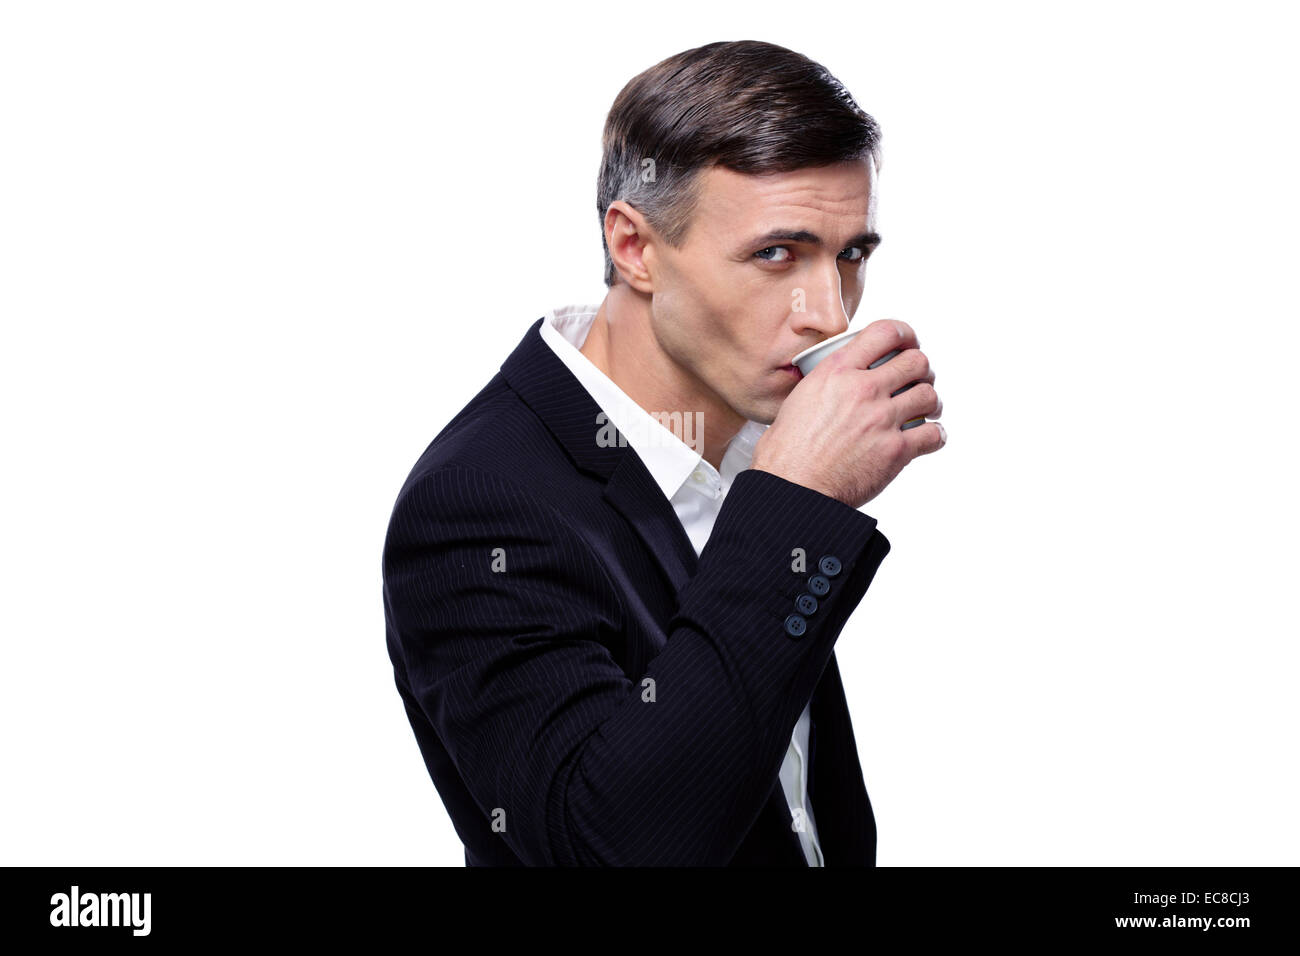 Confident businessman drinking coffee over white background Stock Photo